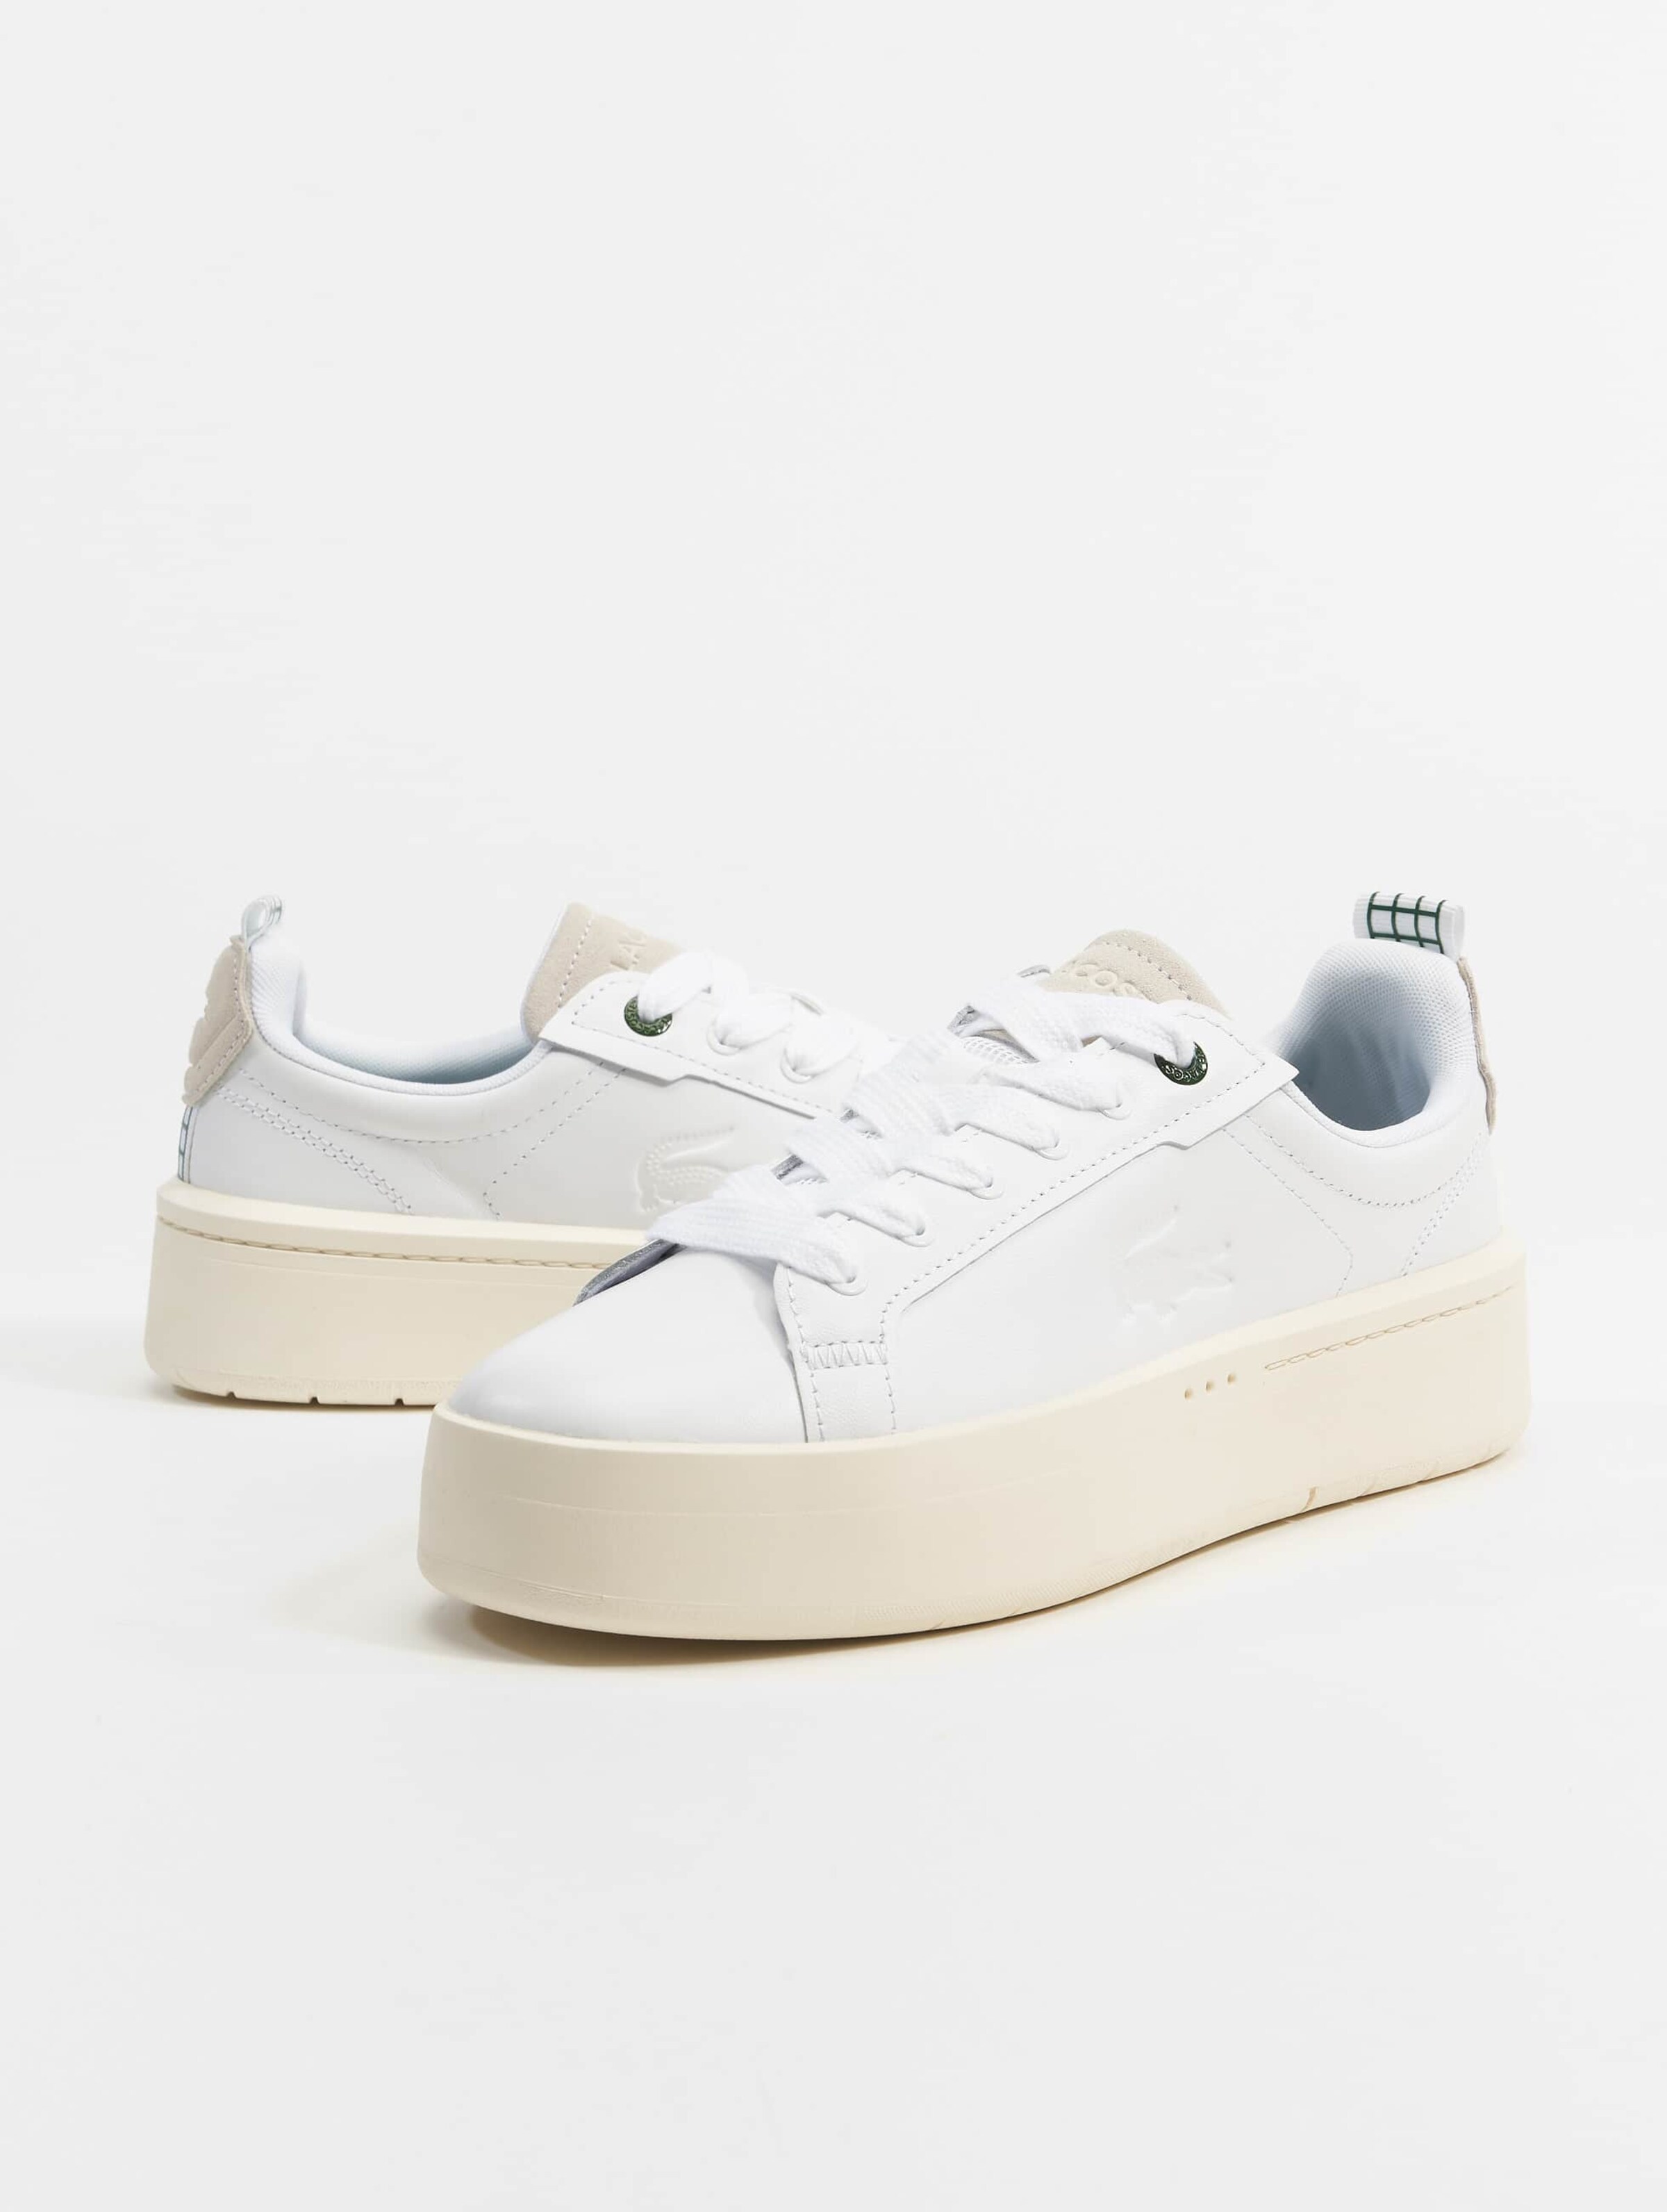 Lacoste Womens Ziane Platform Leather Trainers Sandal,Color:White,Size:37  EU: Buy Online at Best Price in Egypt - Souq is now Amazon.eg